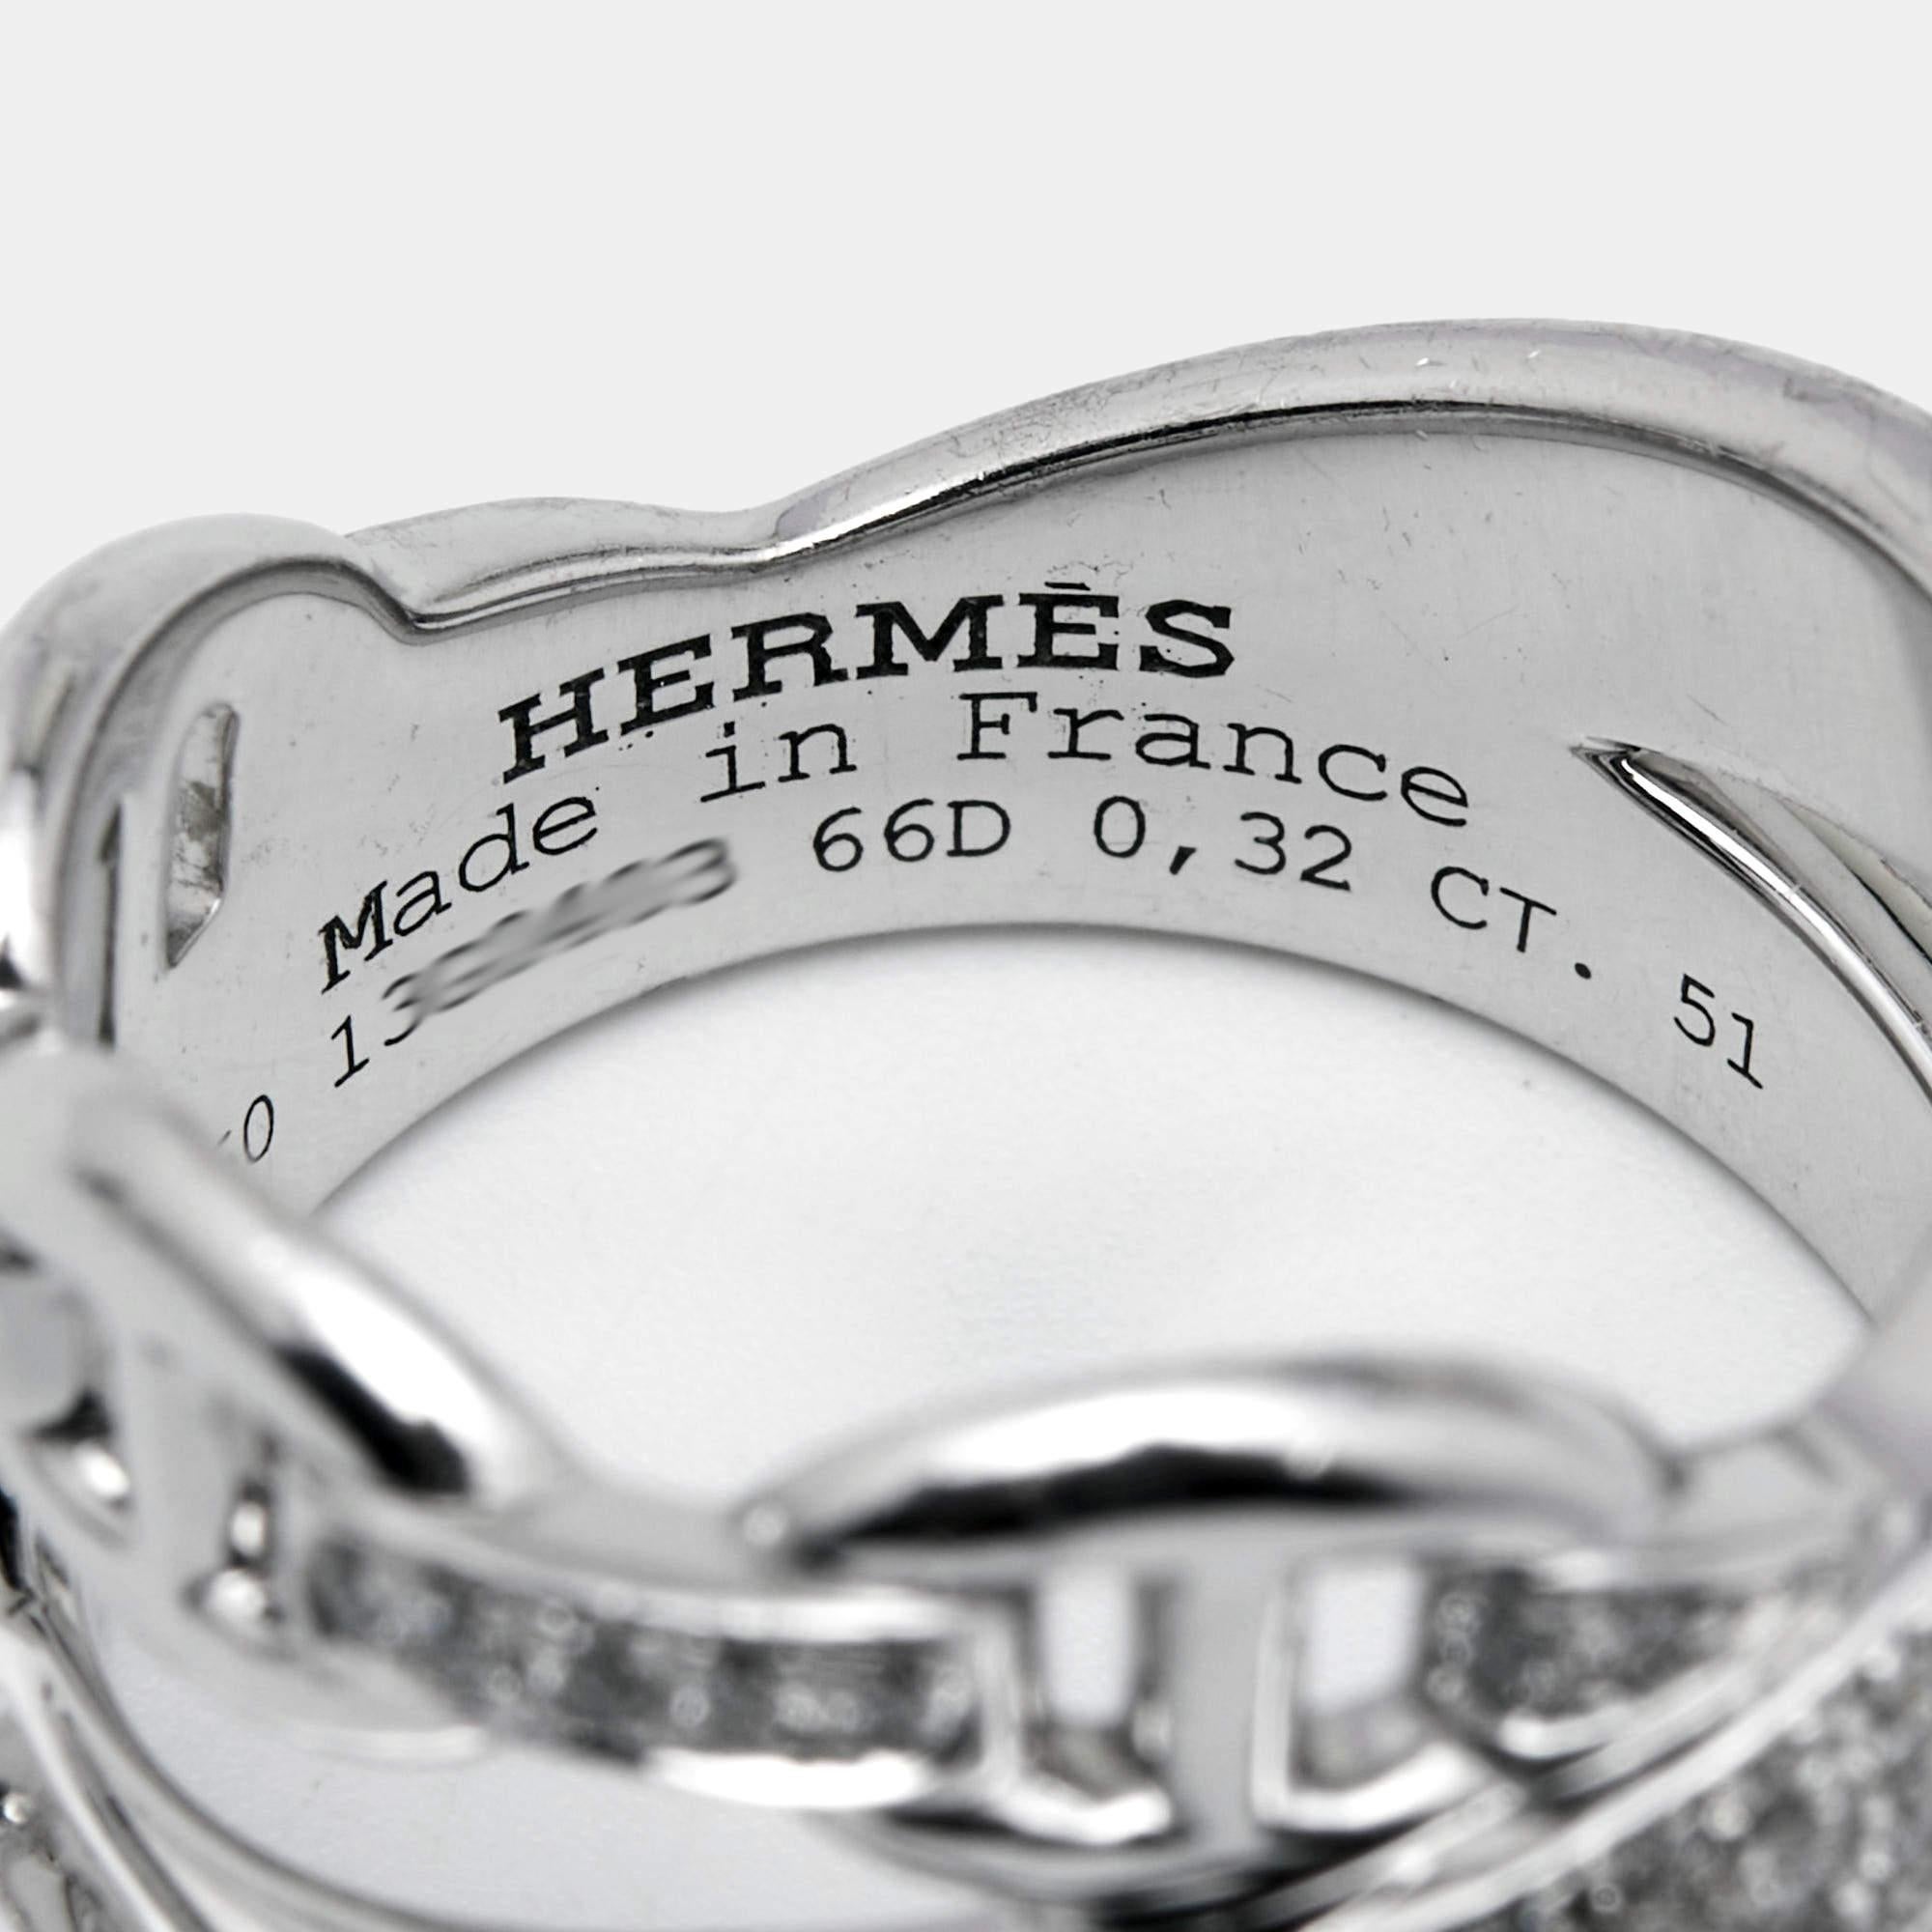 The Hermes Alchimie ring comes as a deconstructed design of three bands each distinct in its own way. The ring is made of 18k white gold and its value is raised by the company of diamonds that sparkle with the wearer. This Hermes fine jewelry ring